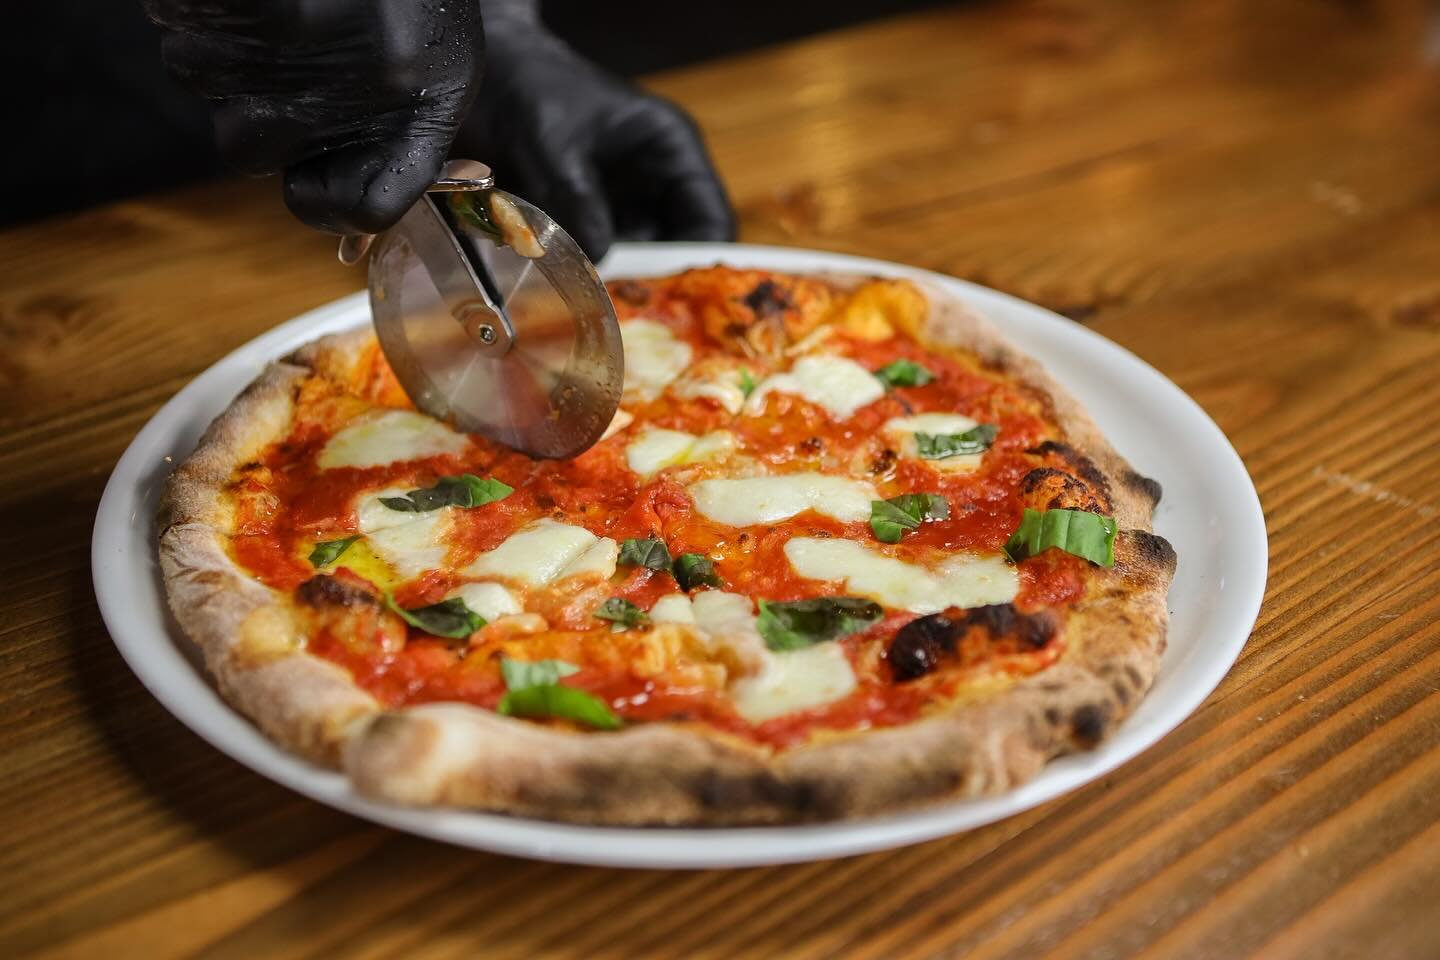 Mondays can be tough, make this one a little easier and let us cook for you. We're serving up Margherita pizzas along with the rest of our tasty wood-fired pizza menu all day from 12-8 pm for in-house and to-go. 

📞541-234-4013

#beachcrestbrewing #